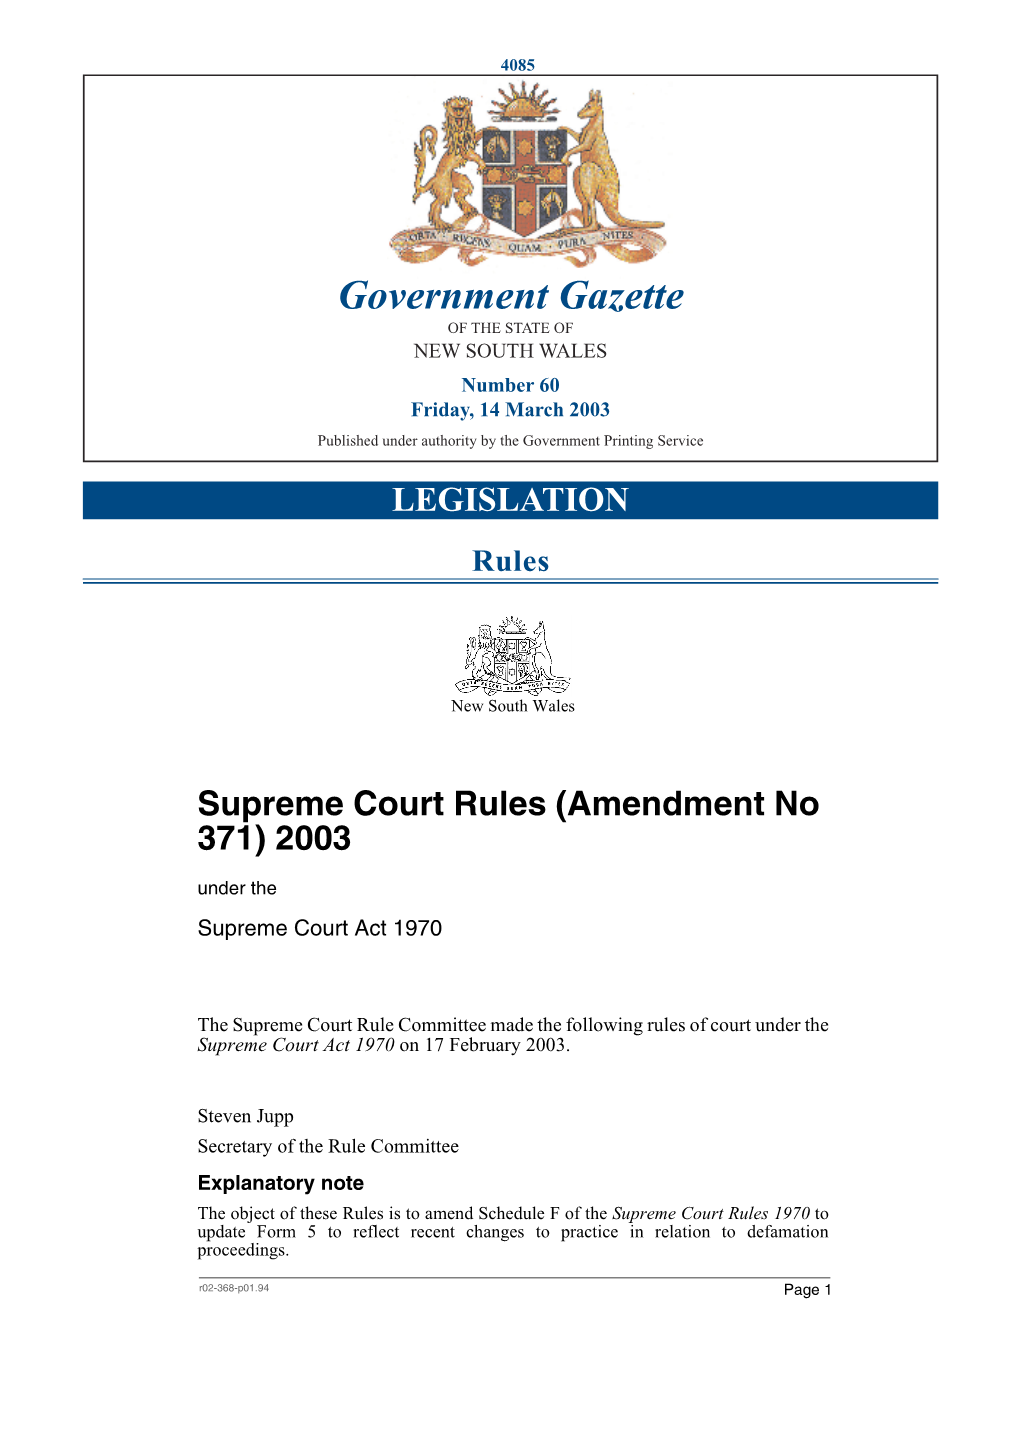 Government Gazette of the STATE of NEW SOUTH WALES Number 60 Friday, 14 March 2003 Published Under Authority by the Government Printing Service